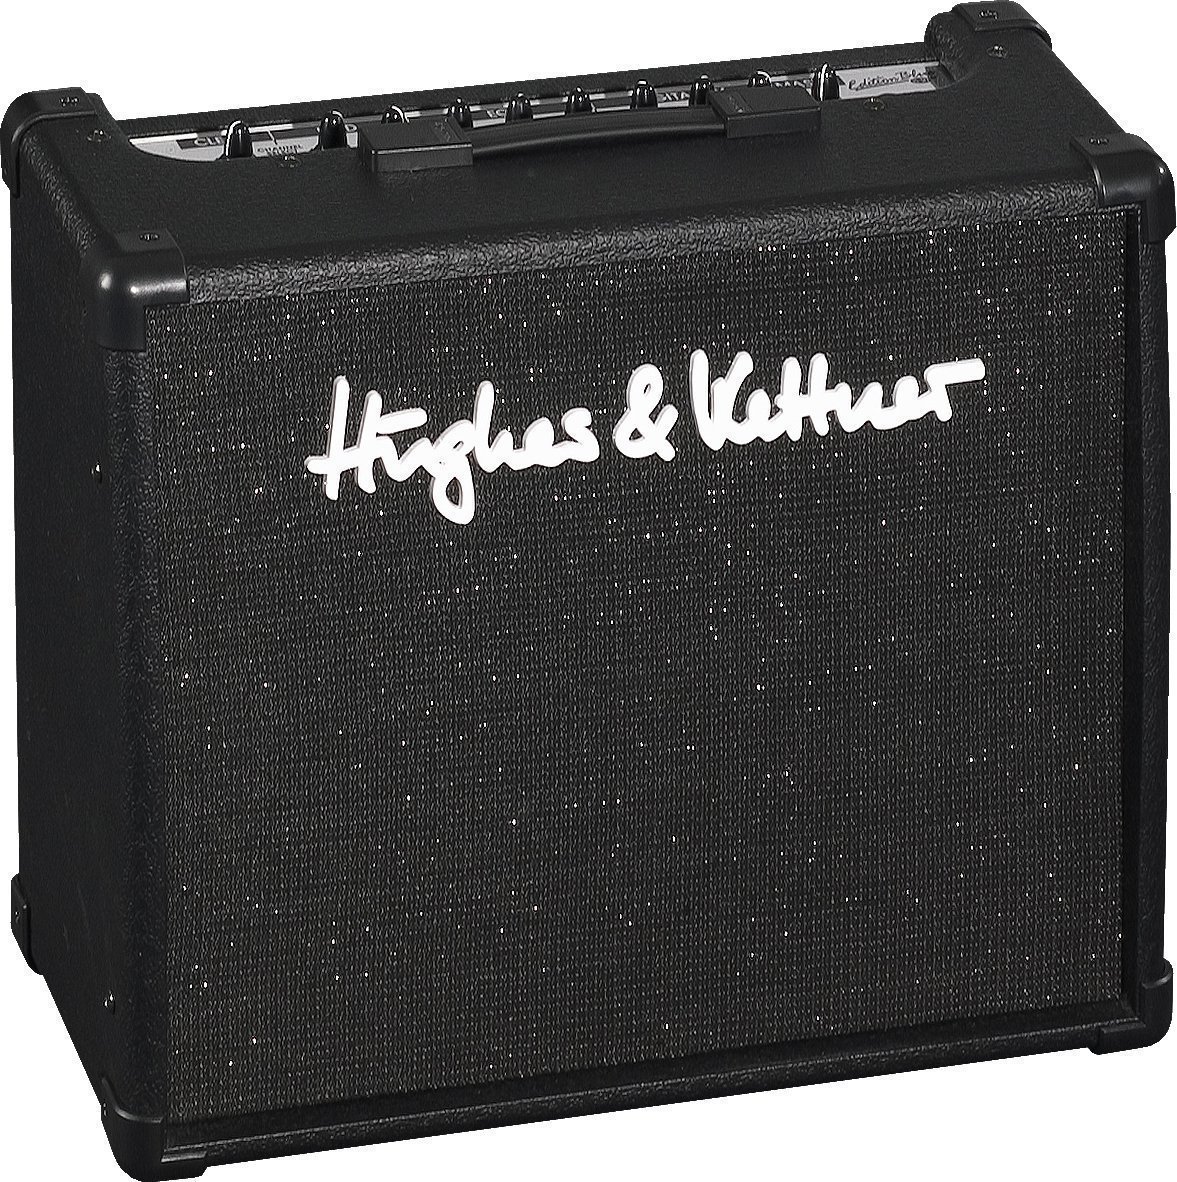 Solid-State Combo Hughes & Kettner Edition Blue 15 DFX